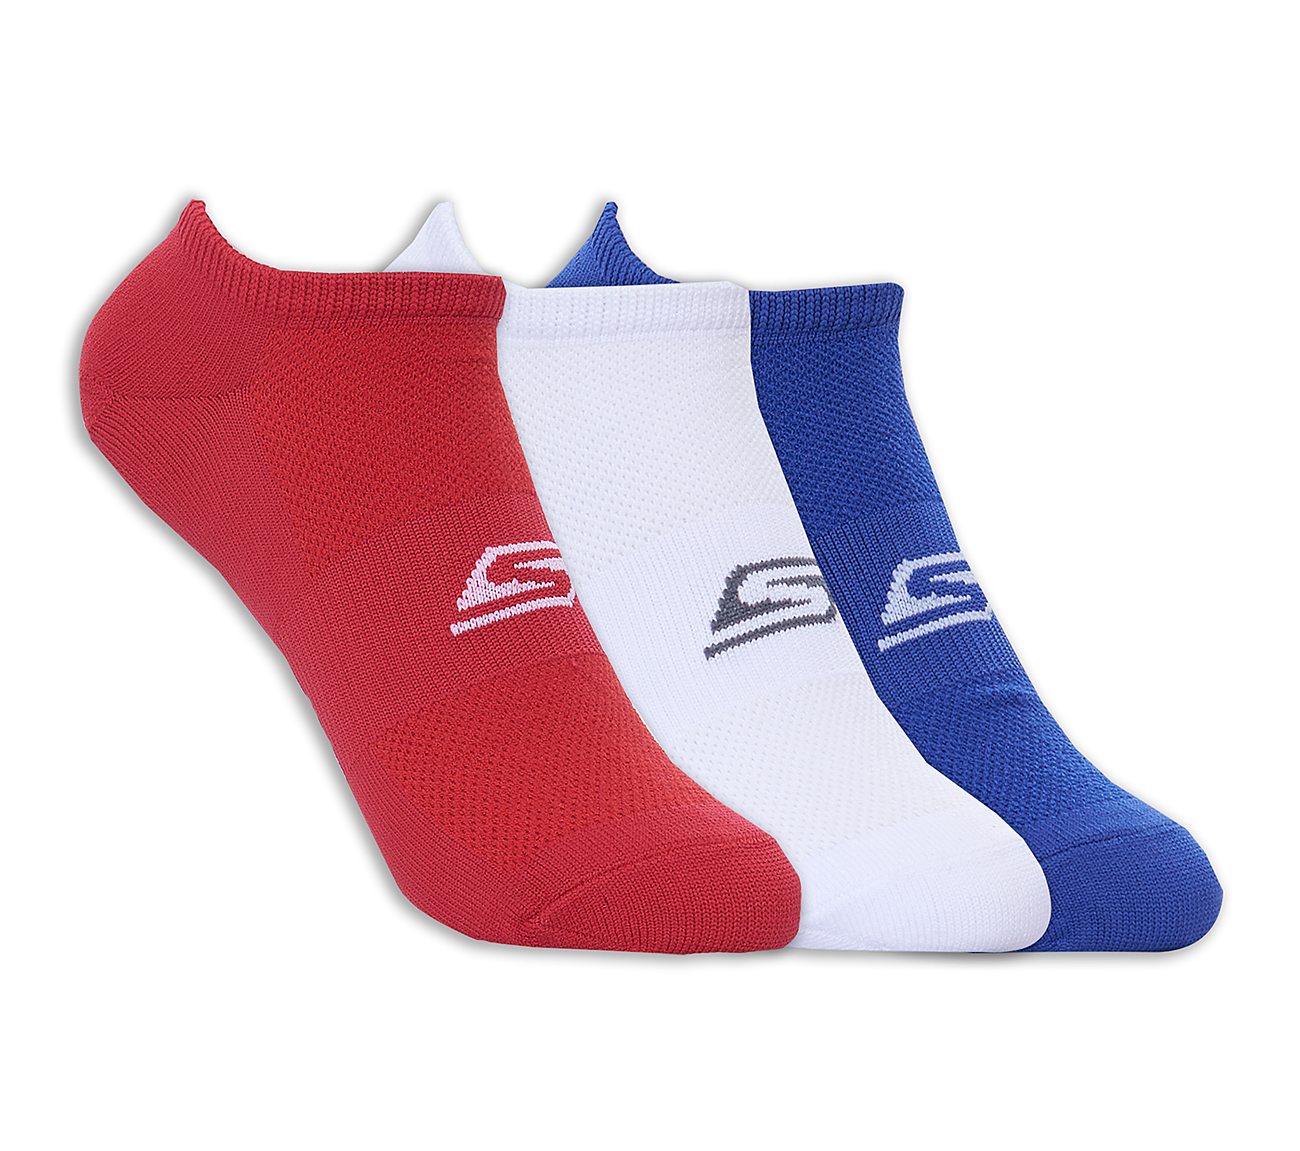 Buy SKECHERS 3 Pack No Show Stretch Socks Accessories Shoes